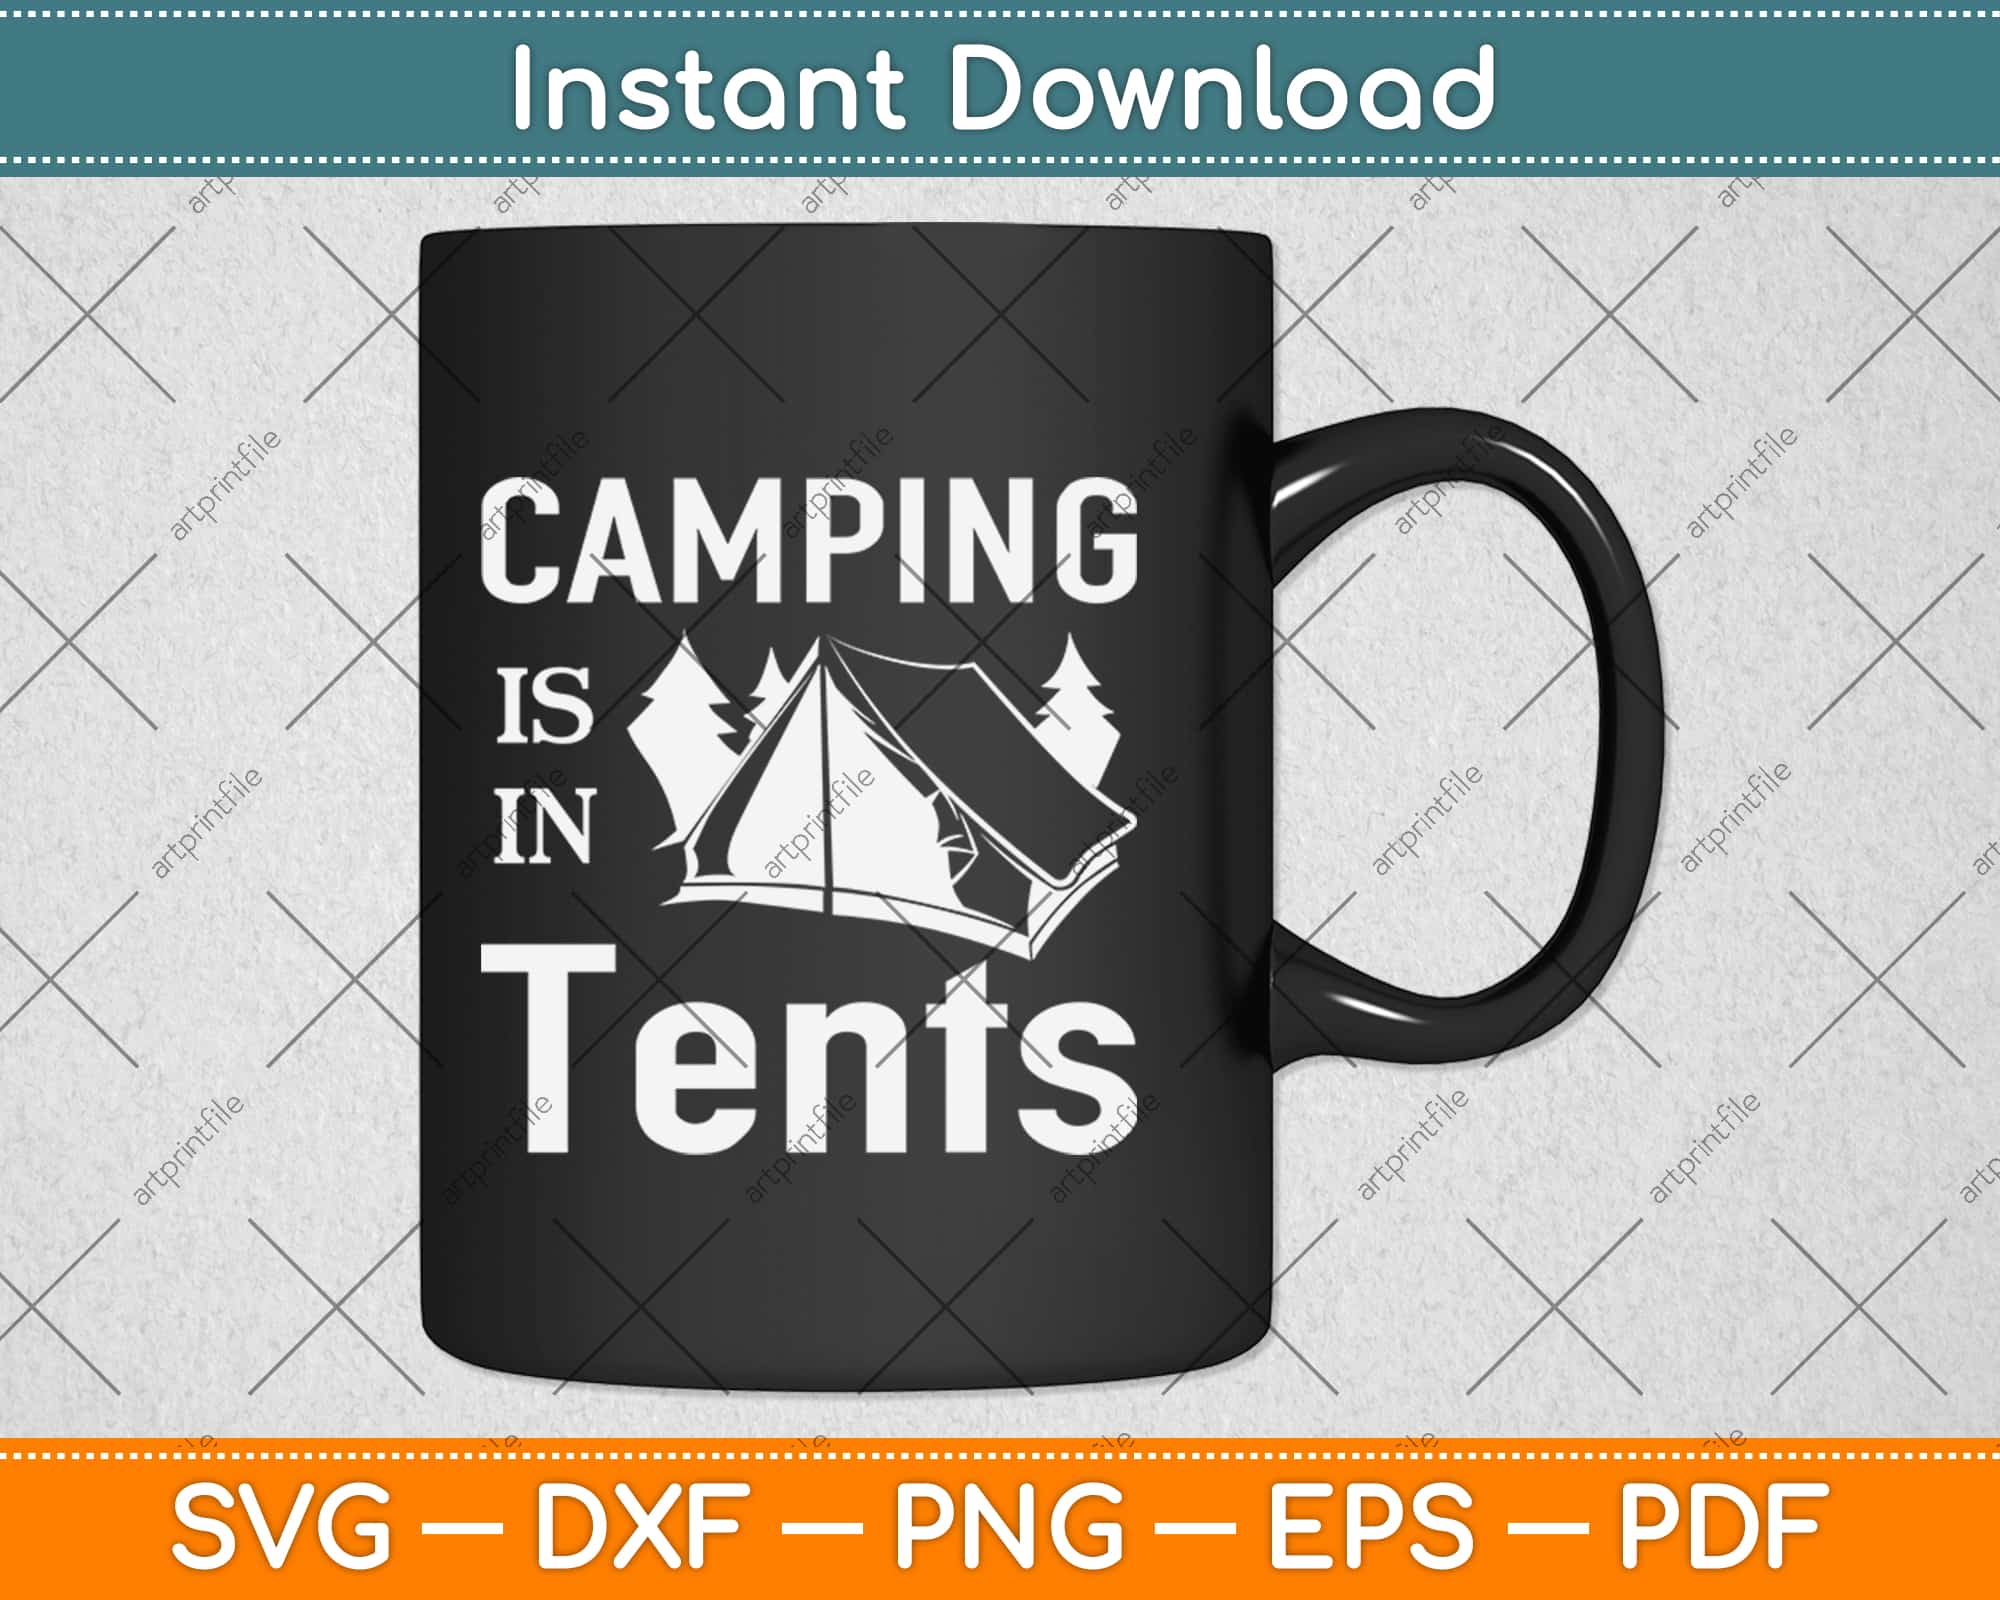 Camping Is Intents